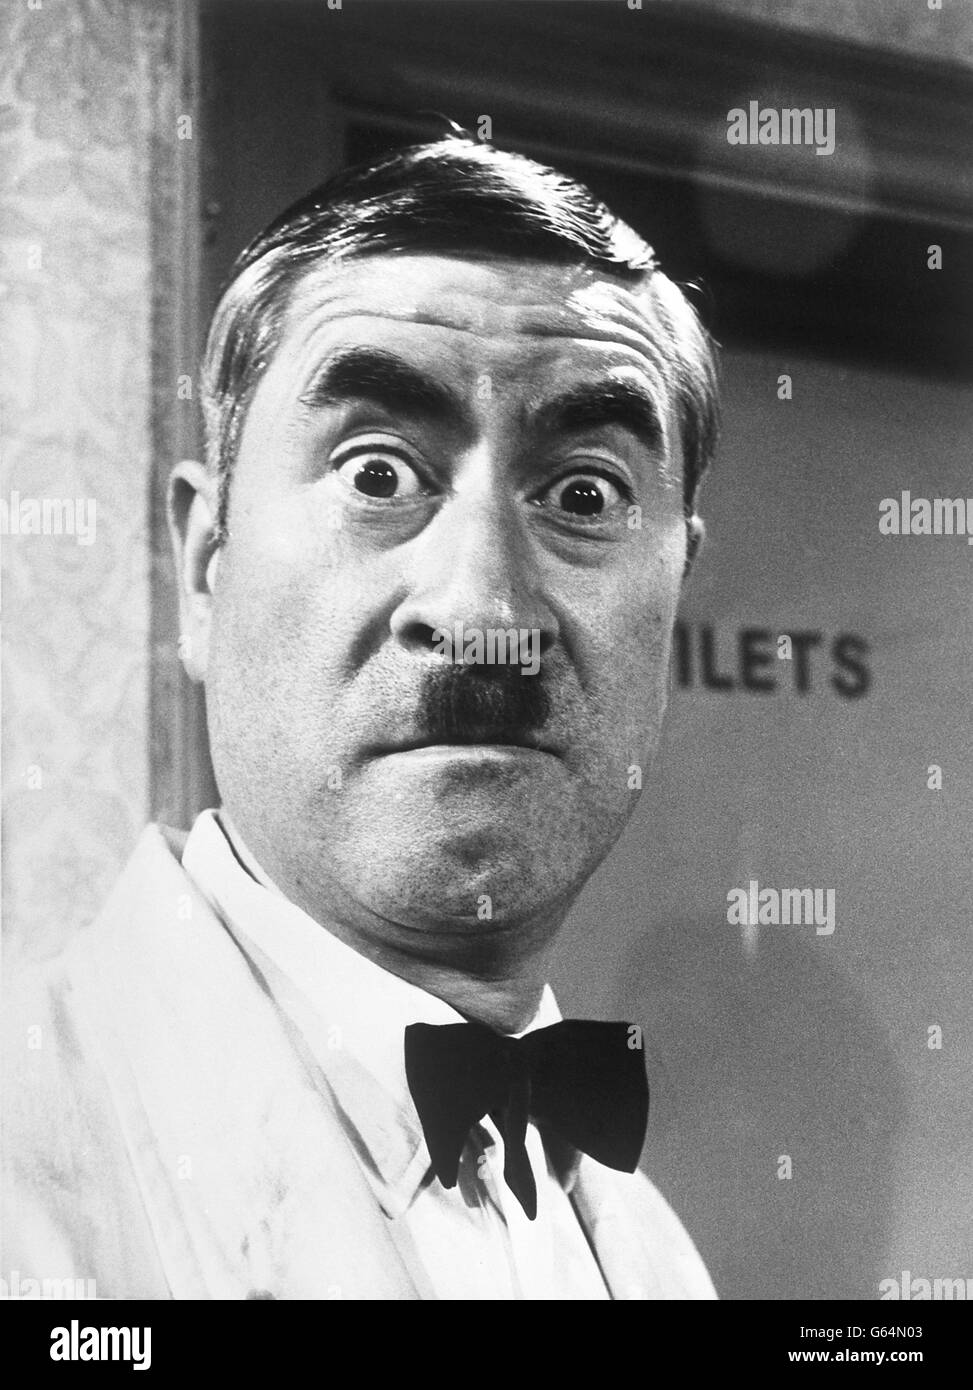 Entertainment - Actor Bill Pertwee Stock Photo